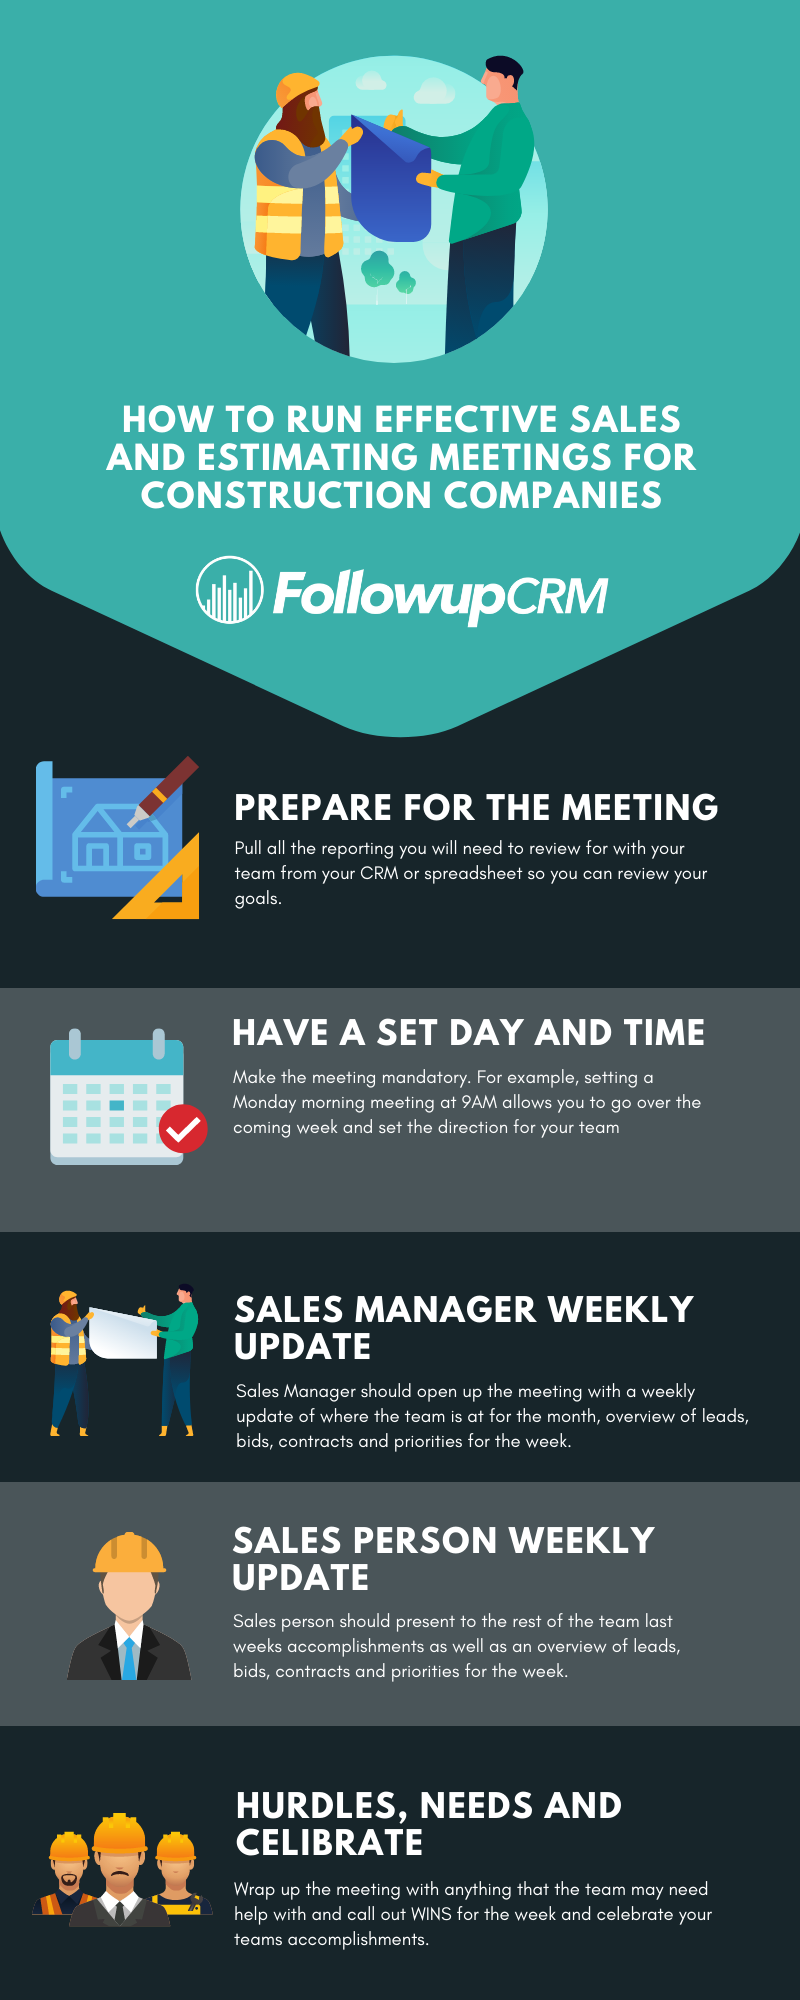 How to Run a Successful Sales Meeting Using Followup CRM